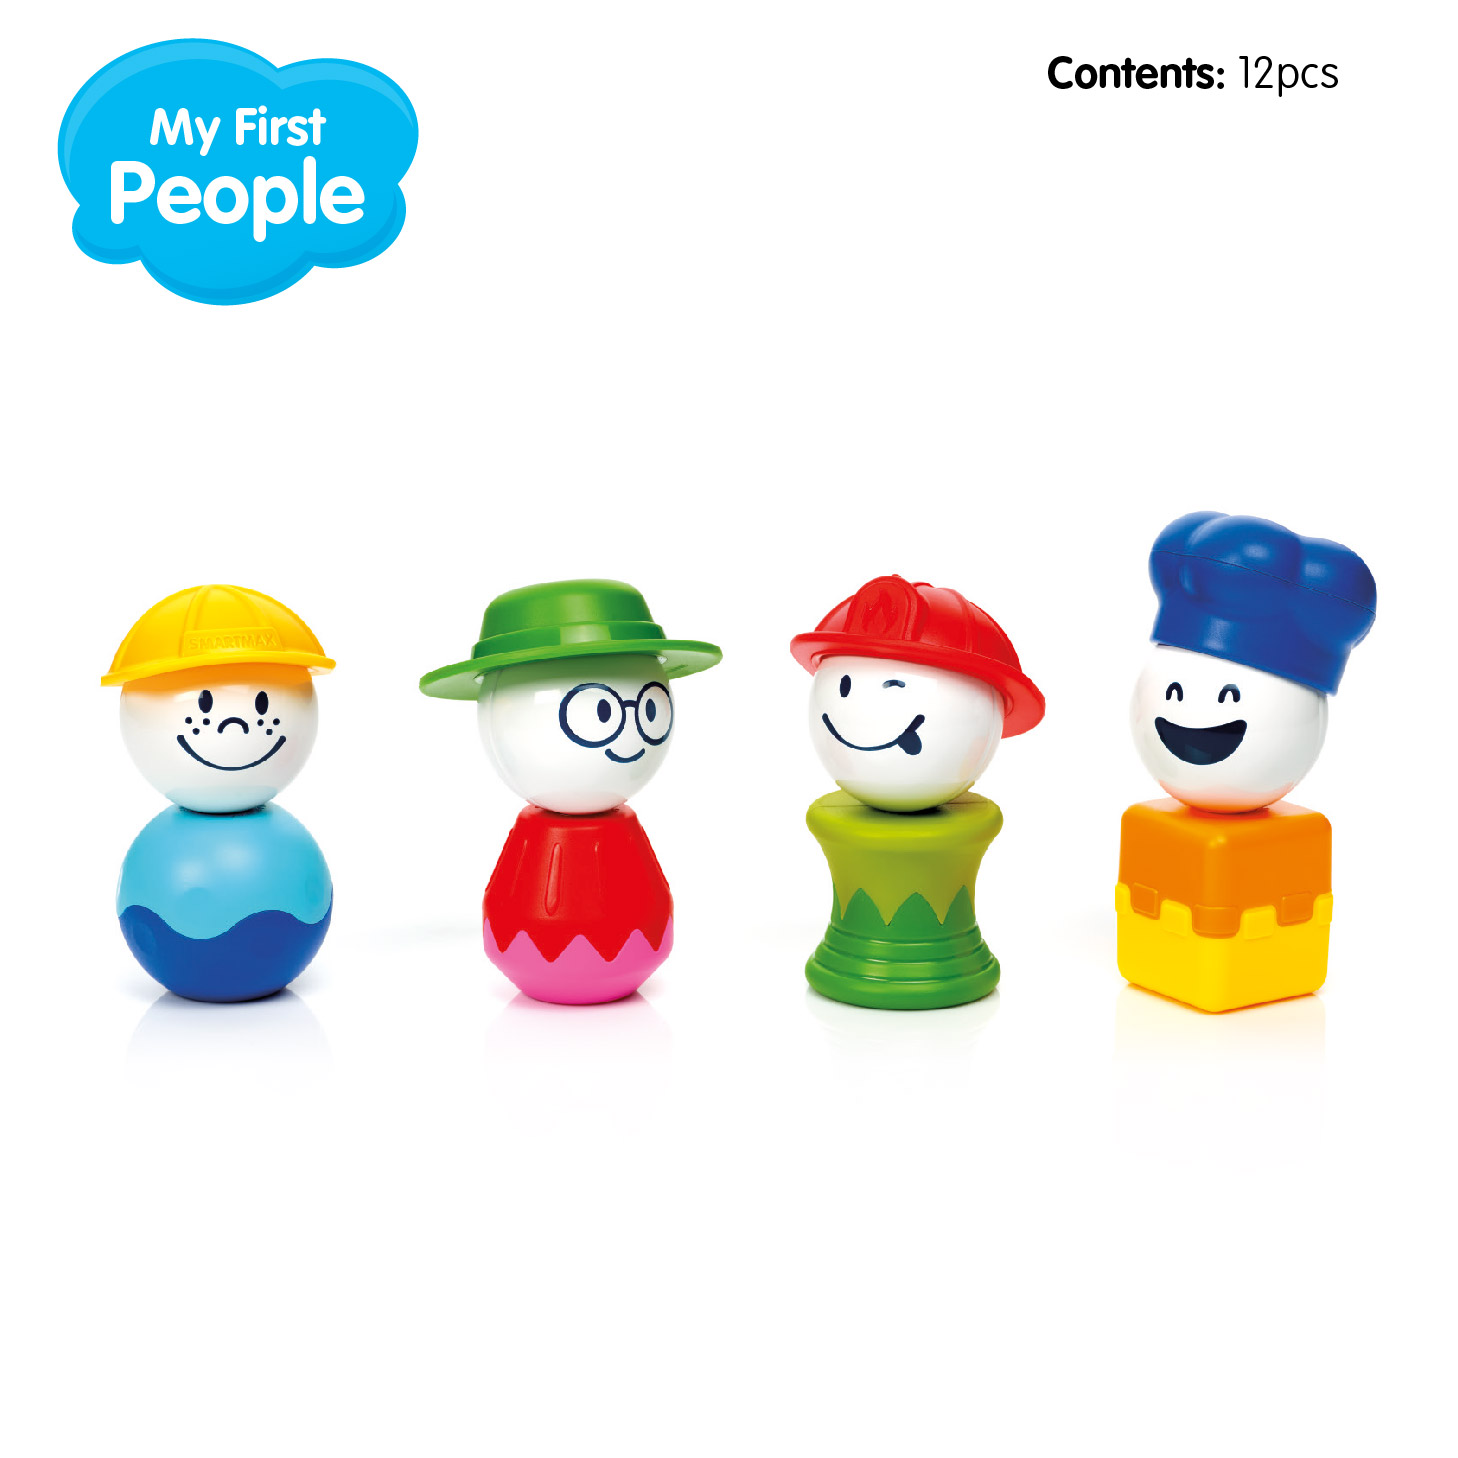 My First People